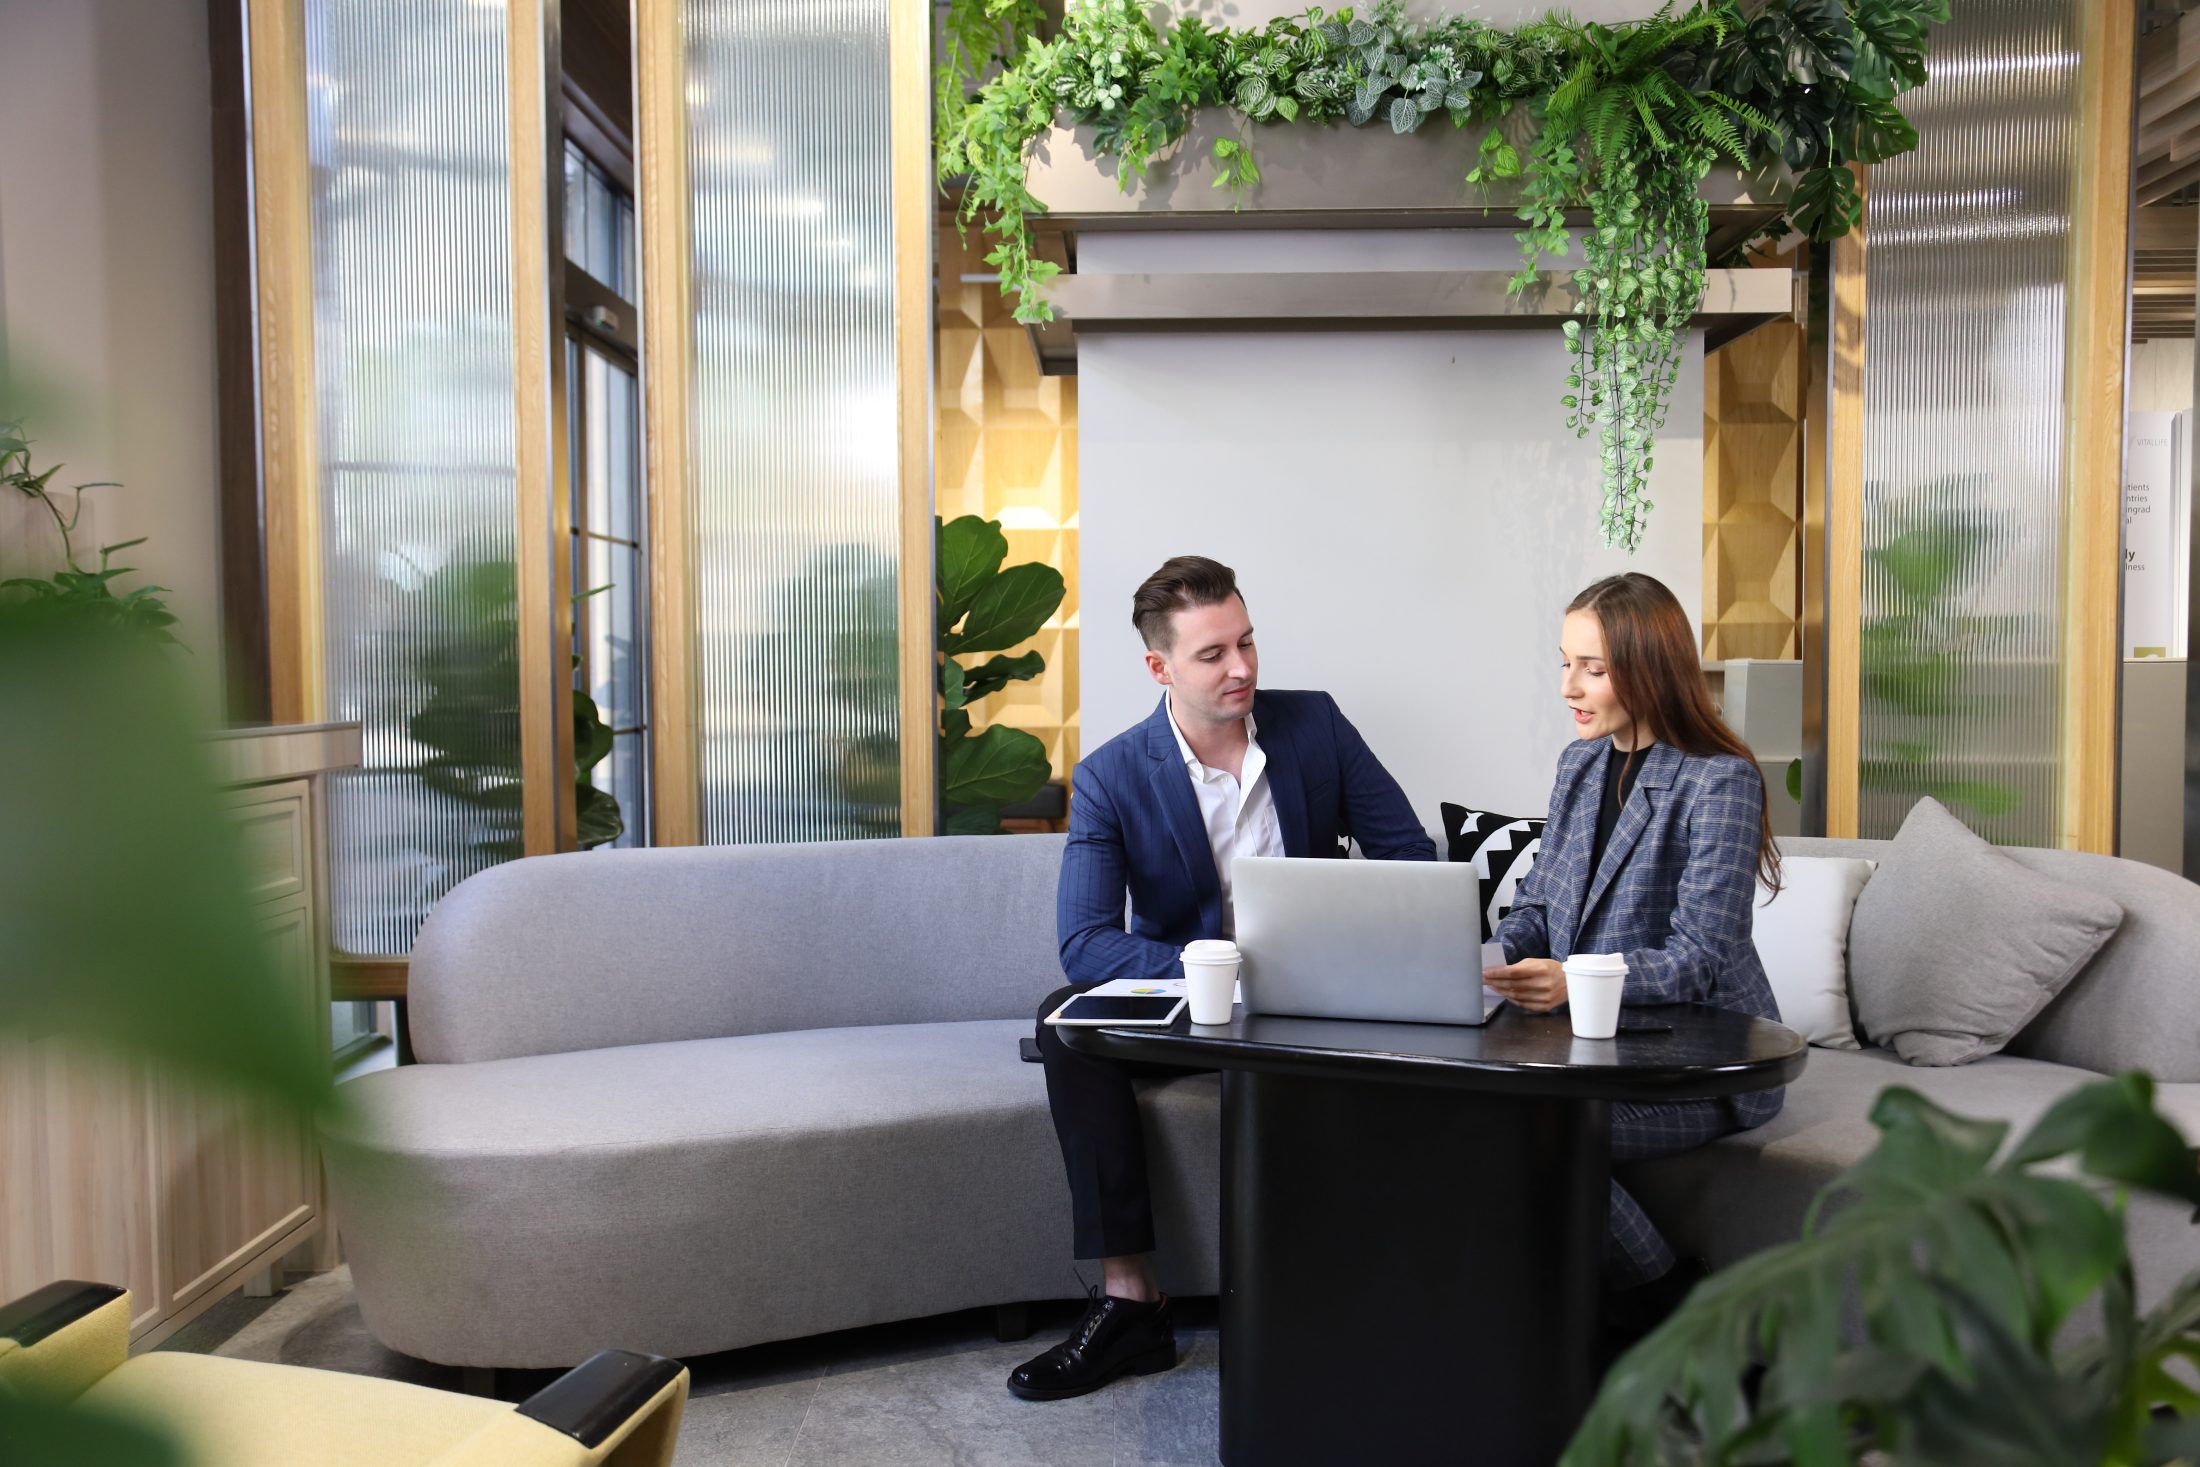 The Benefits of Adding Interior Gardens to Your Office Buildings